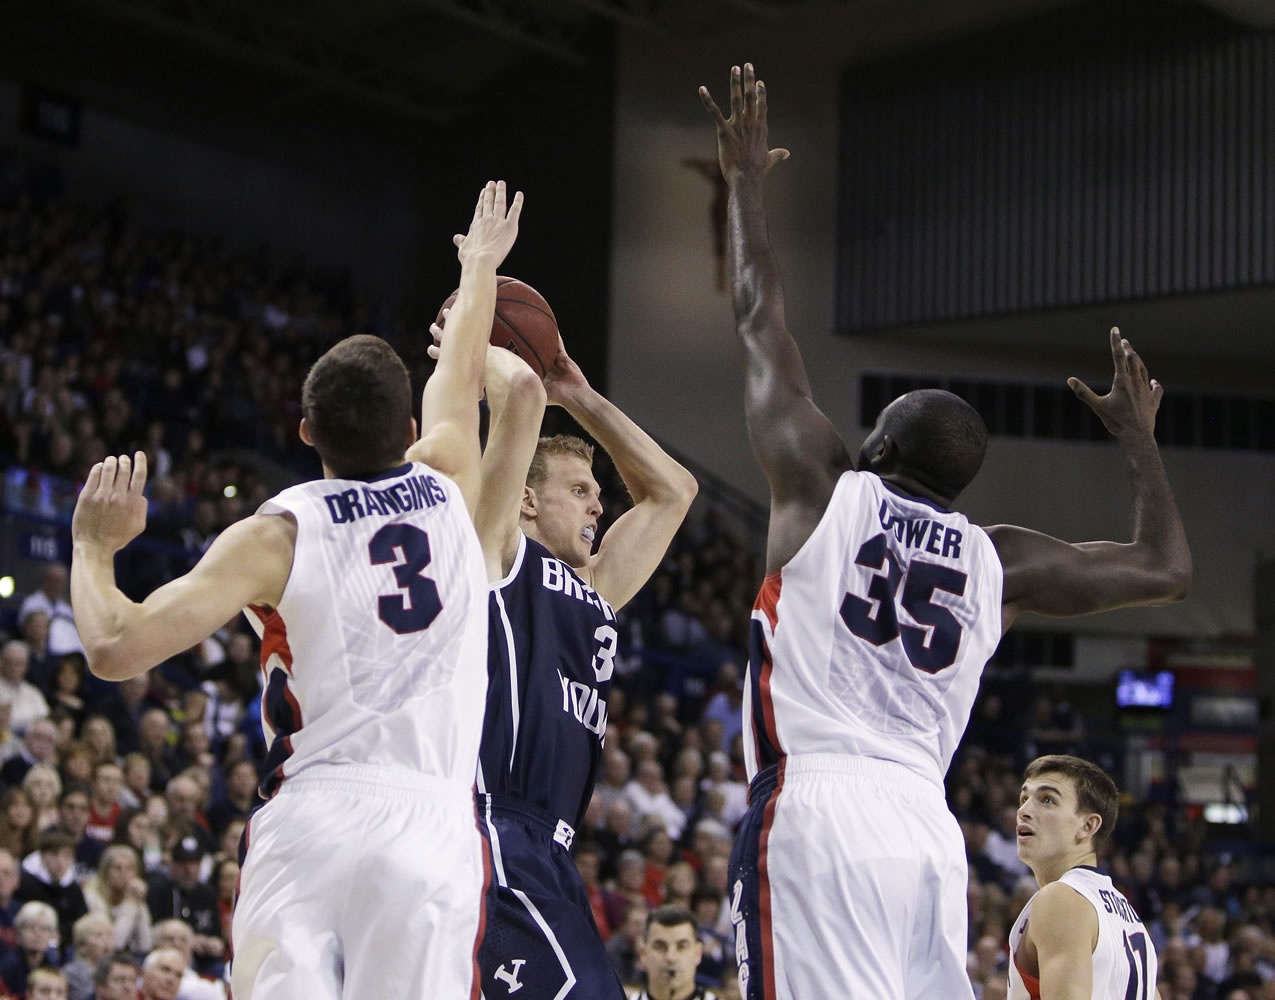 BYU's Tyler Haws (3) looks for a teammate to pass as Gonzaga's Kyle Dranginis (3) and Sam Dower Jr. (35) defend during the first half Saturday in Spokane.